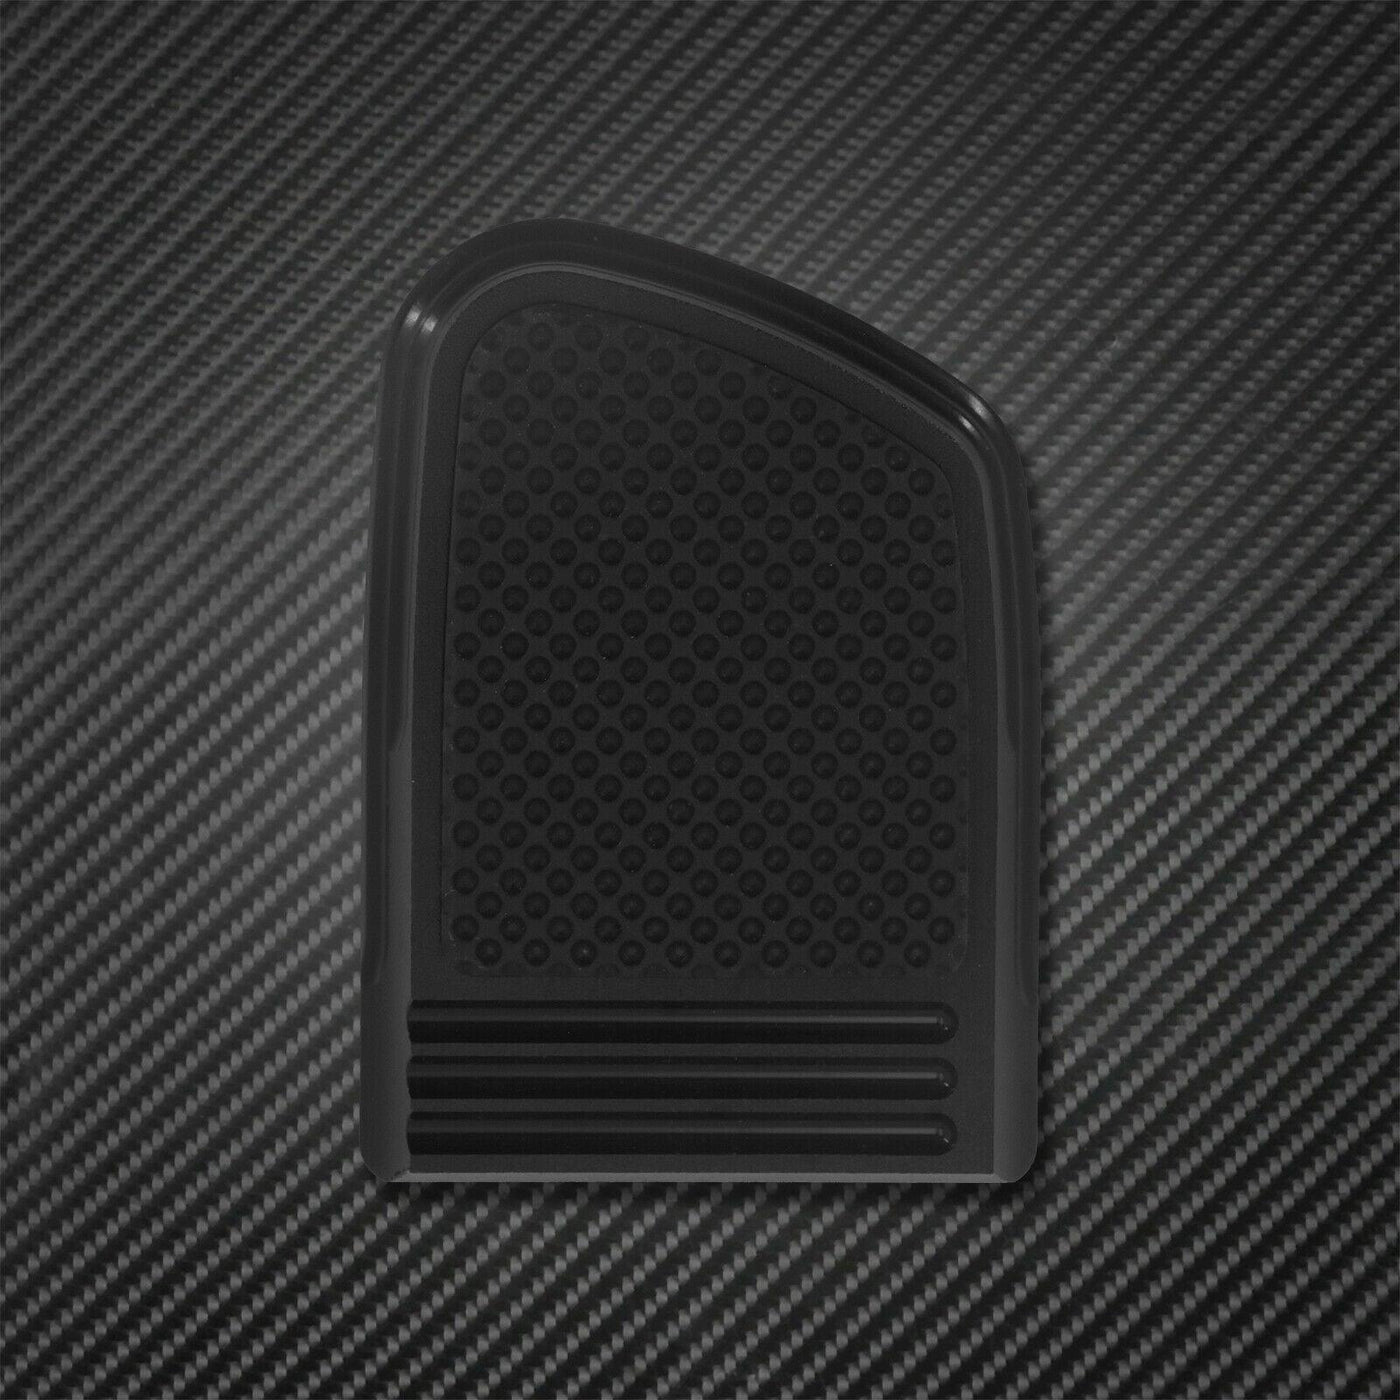 Black Brake Pedal Pad Cover Fit For Harley Softail Sport Glide FXBRS 2018-2021 - Moto Life Products